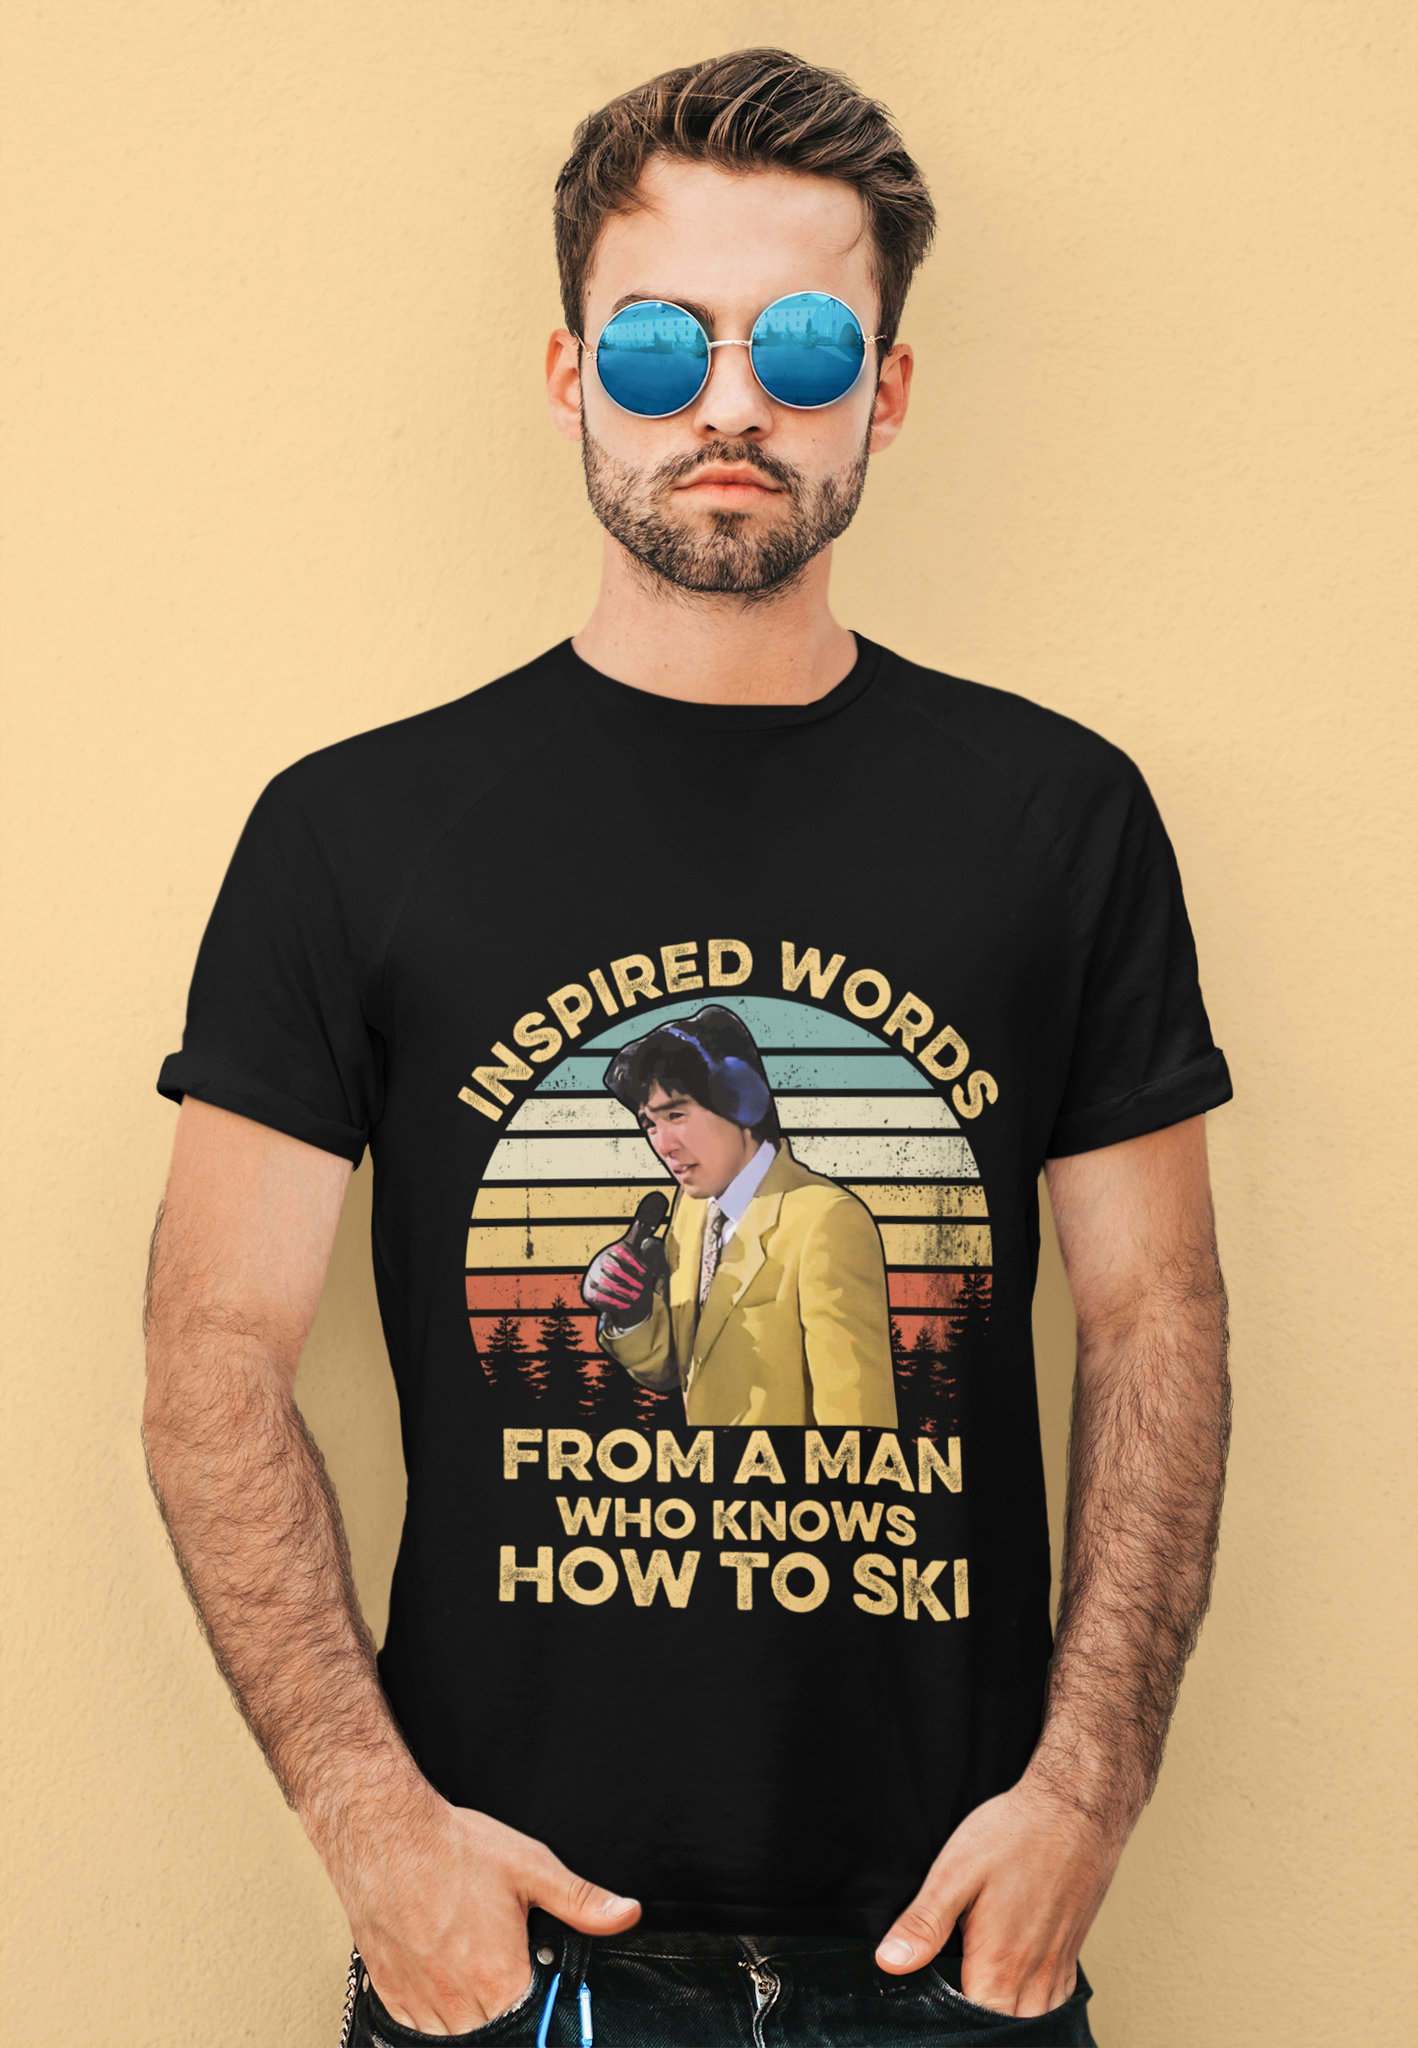 Better Off Dead Comedy Film T Shirt, Yee Sook Ree T Shirt, Man Who Knows How To Ski Tshirt